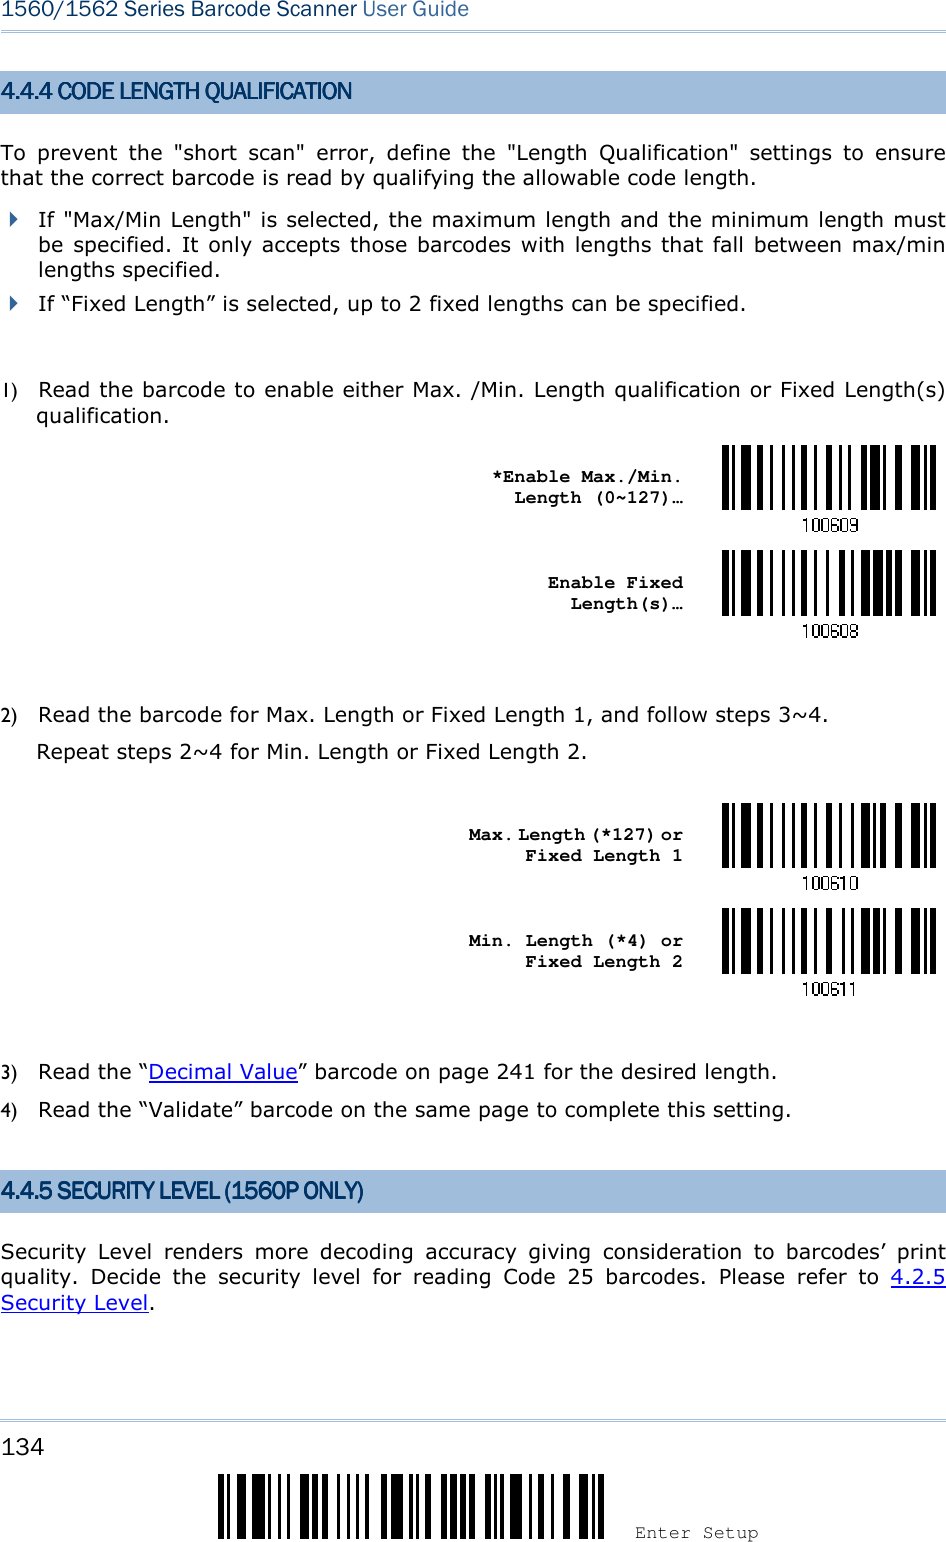 134 Enter Setup 1560/1562 Series Barcode Scanner User Guide  4.4.4 CODE LENGTH QU4.4.4 CODE LENGTH QU4.4.4 CODE LENGTH QU4.4.4 CODE LENGTH QUALIFICATIONALIFICATIONALIFICATIONALIFICATION    To  prevent  the  &quot;short  scan&quot;  error,  define  the  &quot;Length  Qualification&quot;  settings  to  ensure that the correct barcode is read by qualifying the allowable code length.  If &quot;Max/Min Length&quot; is selected, the maximum length and the minimum length must be specified.  It only accepts those barcodes with lengths that fall between max/min lengths specified.  If “Fixed Length” is selected, up to 2 fixed lengths can be specified.  1) Read the barcode to enable either Max. /Min. Length qualification or Fixed Length(s) qualification.    *Enable Max./Min. Length (0~127)…     Enable Fixed Length(s)…   2) Read the barcode for Max. Length or Fixed Length 1, and follow steps 3~4. Repeat steps 2~4 for Min. Length or Fixed Length 2.     Max. Length (*127) or Fixed Length 1     Min. Length (*4) or Fixed Length 2   3) Read the “Decimal Value” barcode on page 241 for the desired length.   4) Read the “Validate” barcode on the same page to complete this setting.   4.4.5 SECURITY4.4.5 SECURITY4.4.5 SECURITY4.4.5 SECURITY    LEVELLEVELLEVELLEVEL    (1560P ONLY)(1560P ONLY)(1560P ONLY)(1560P ONLY)    Security  Level  renders  more  decoding  accuracy  giving  consideration  to  barcodes’  print quality.  Decide  the  security  level  for  reading  Code  25  barcodes.  Please  refer  to  4.2.5 Security Level.   